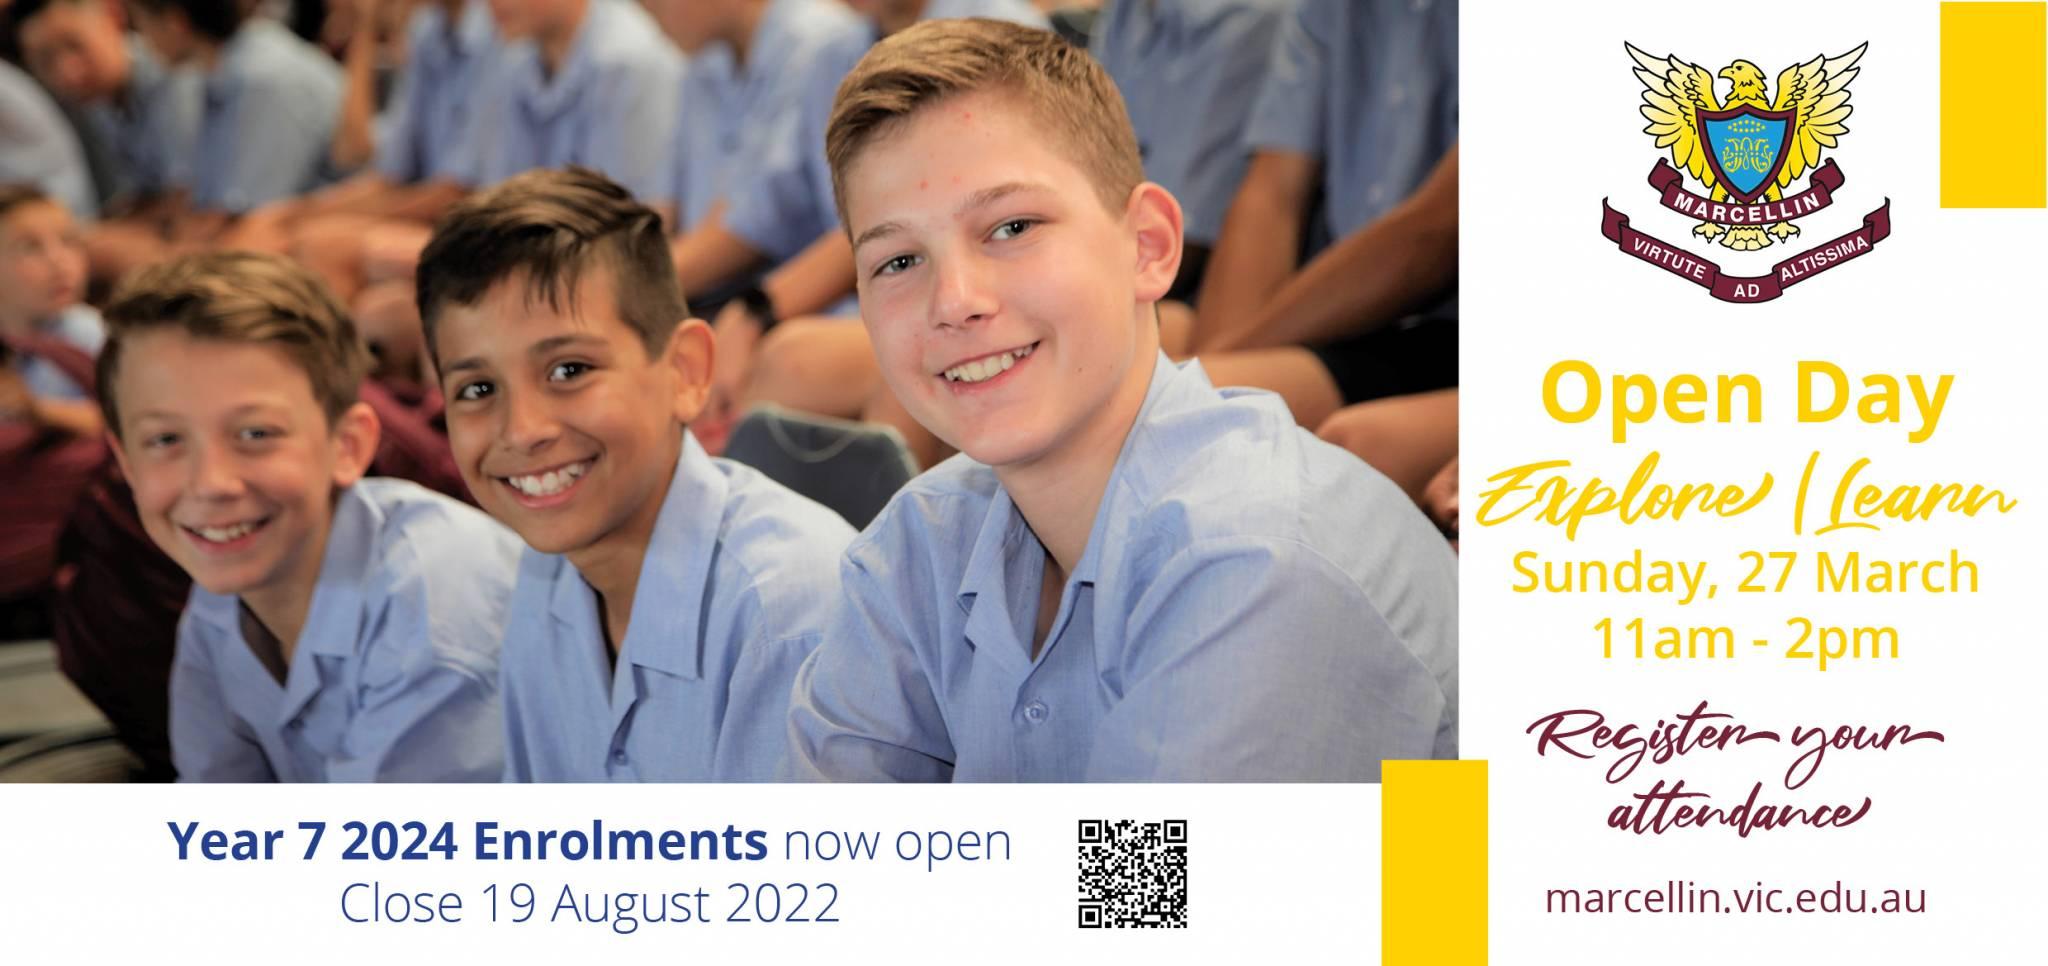 Marcellin College Open Day